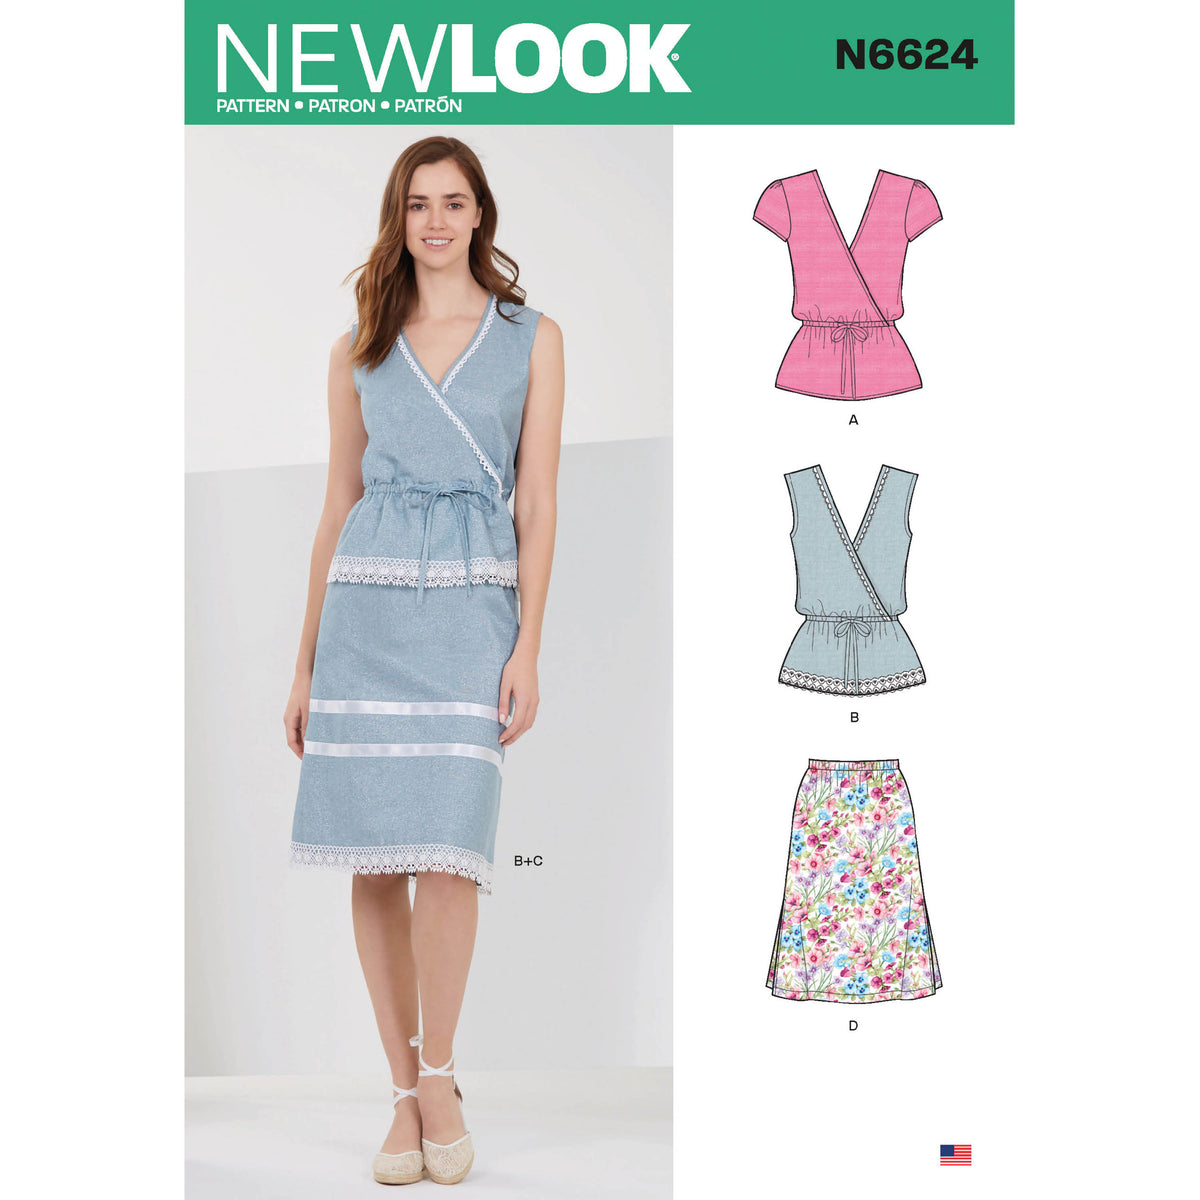 6624 New Look Sewing Pattern N6624 Misses' Tops And Pull On Skirts